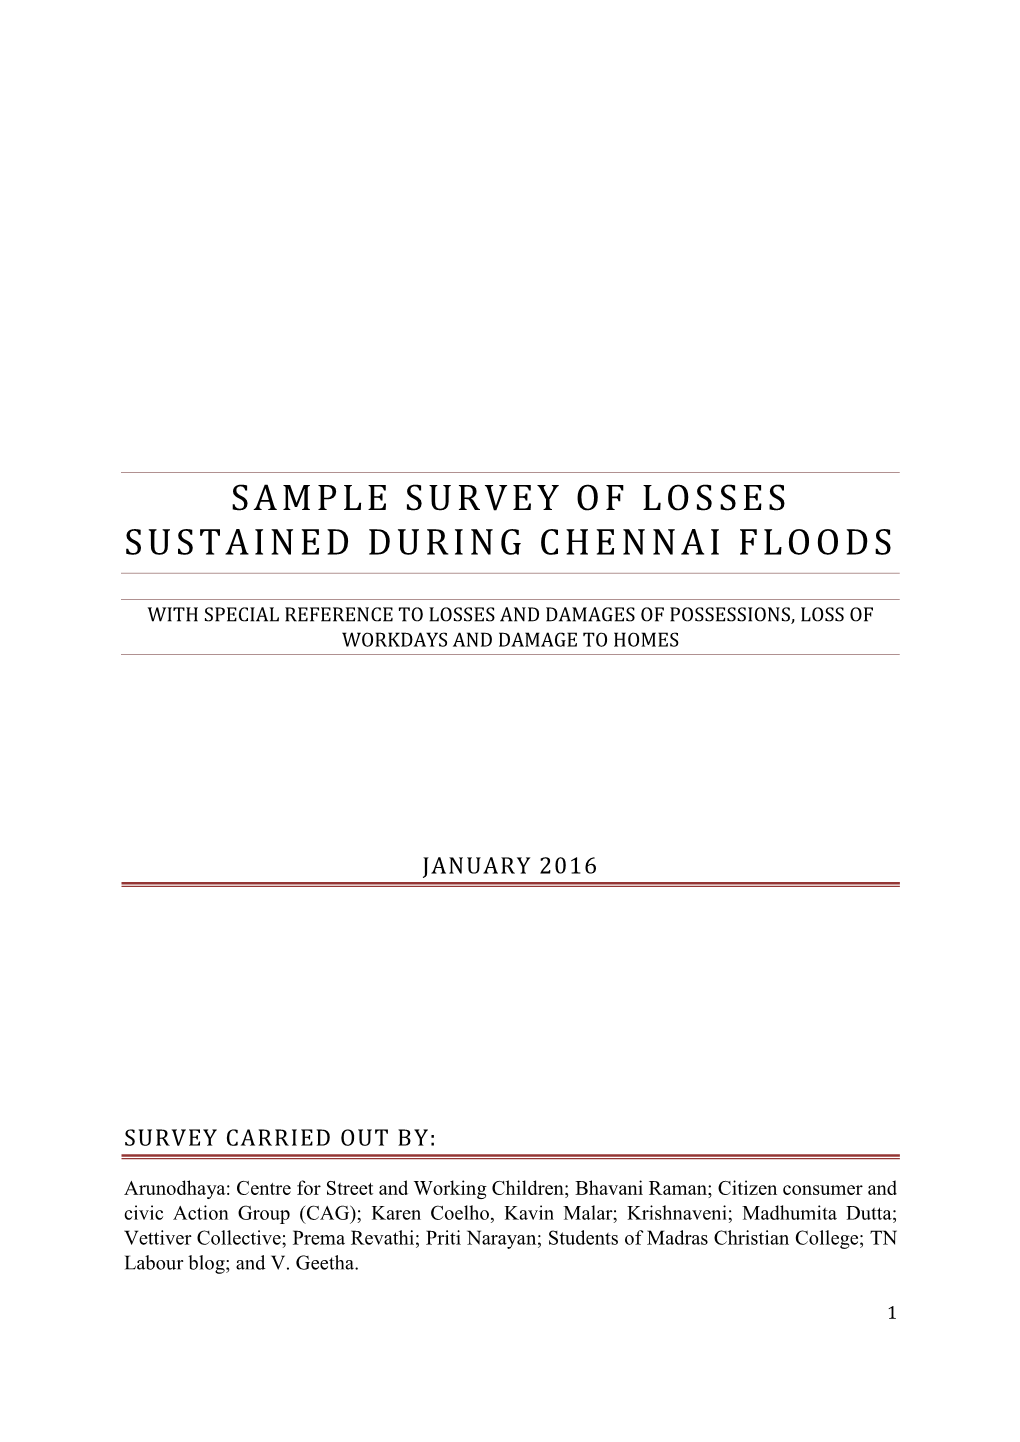 Sample Survey of Losses Sustained During Chennai